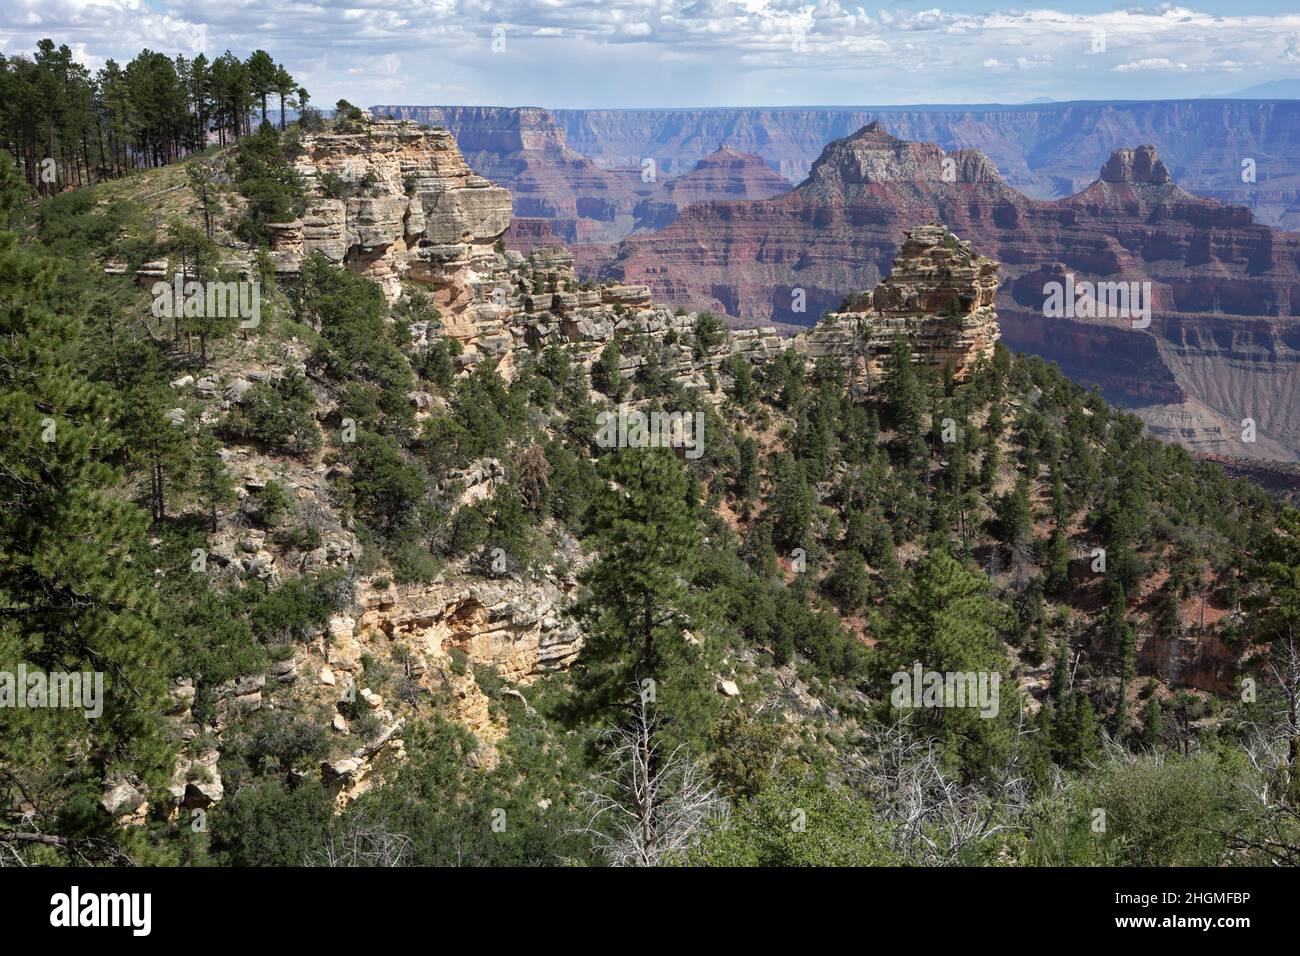 View from the North Rim of the Grand Canyon at Widforss Point. Summertime view of eroded red and white sandstone layers, ridges, mesas, and buttes car Stock Photo